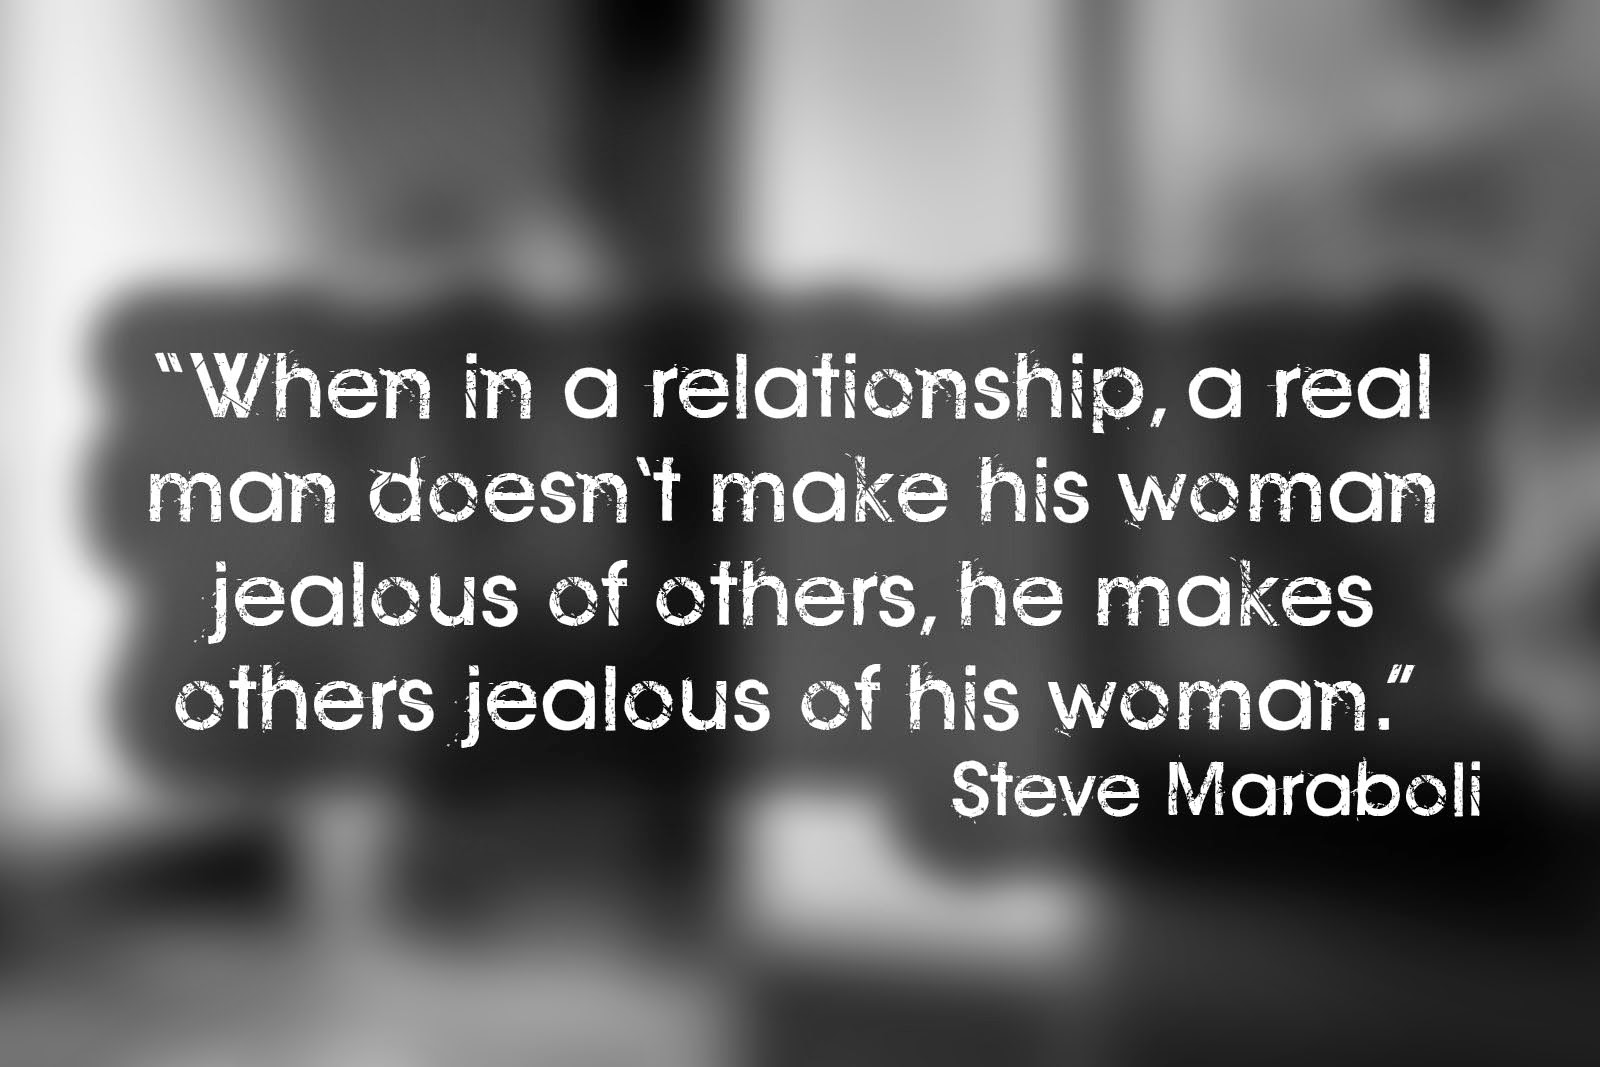 marriage-quotes